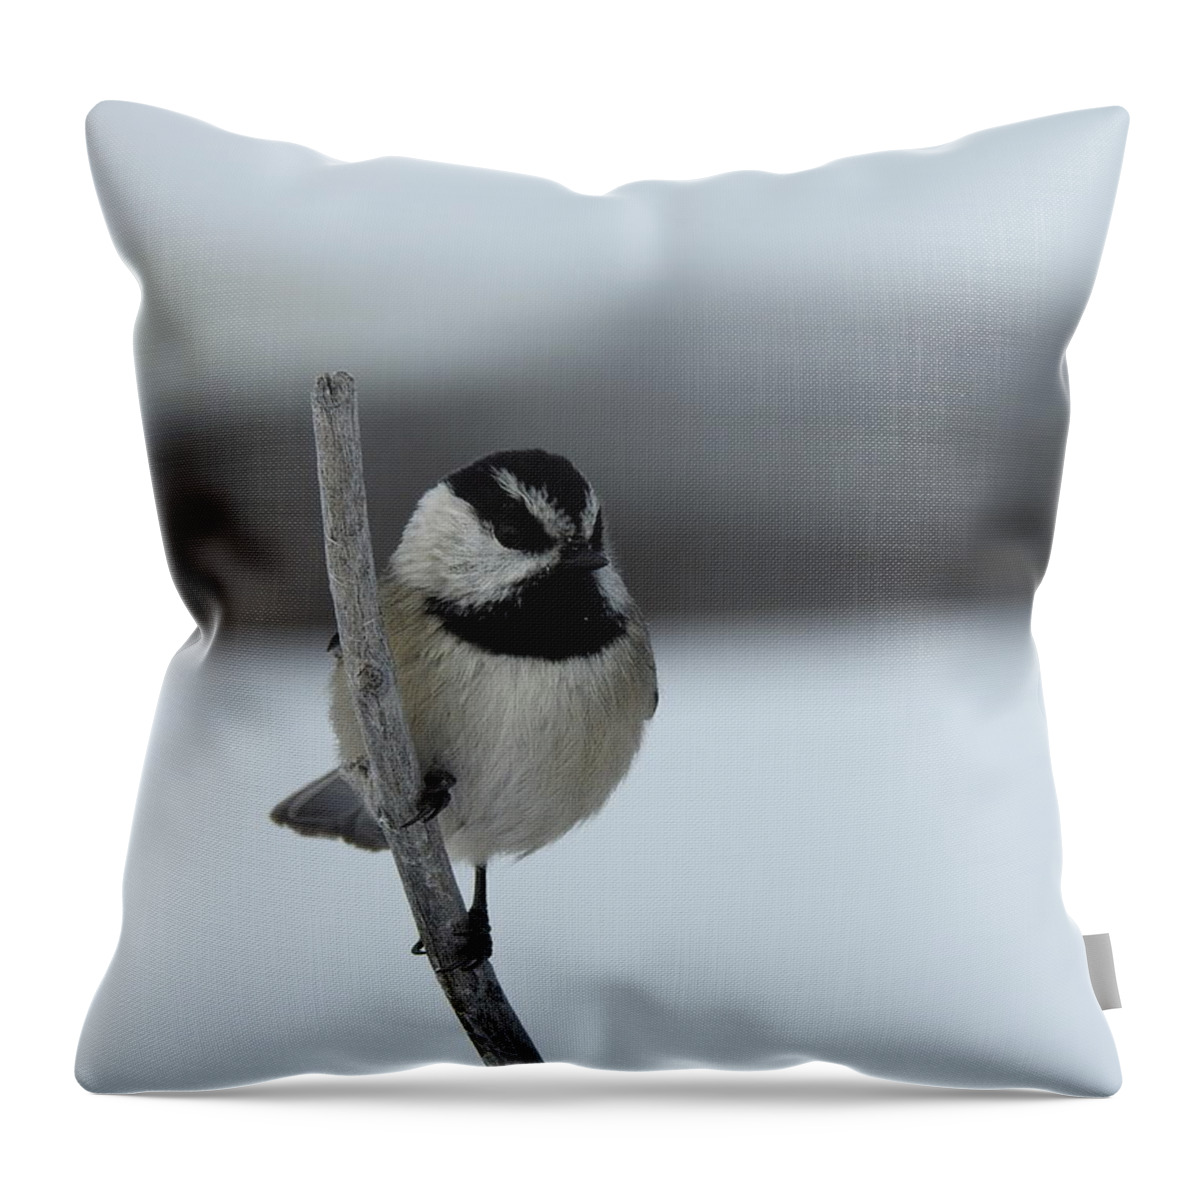 Black Capped Chickadee Throw Pillow featuring the photograph Chickadee by Nicola Finch